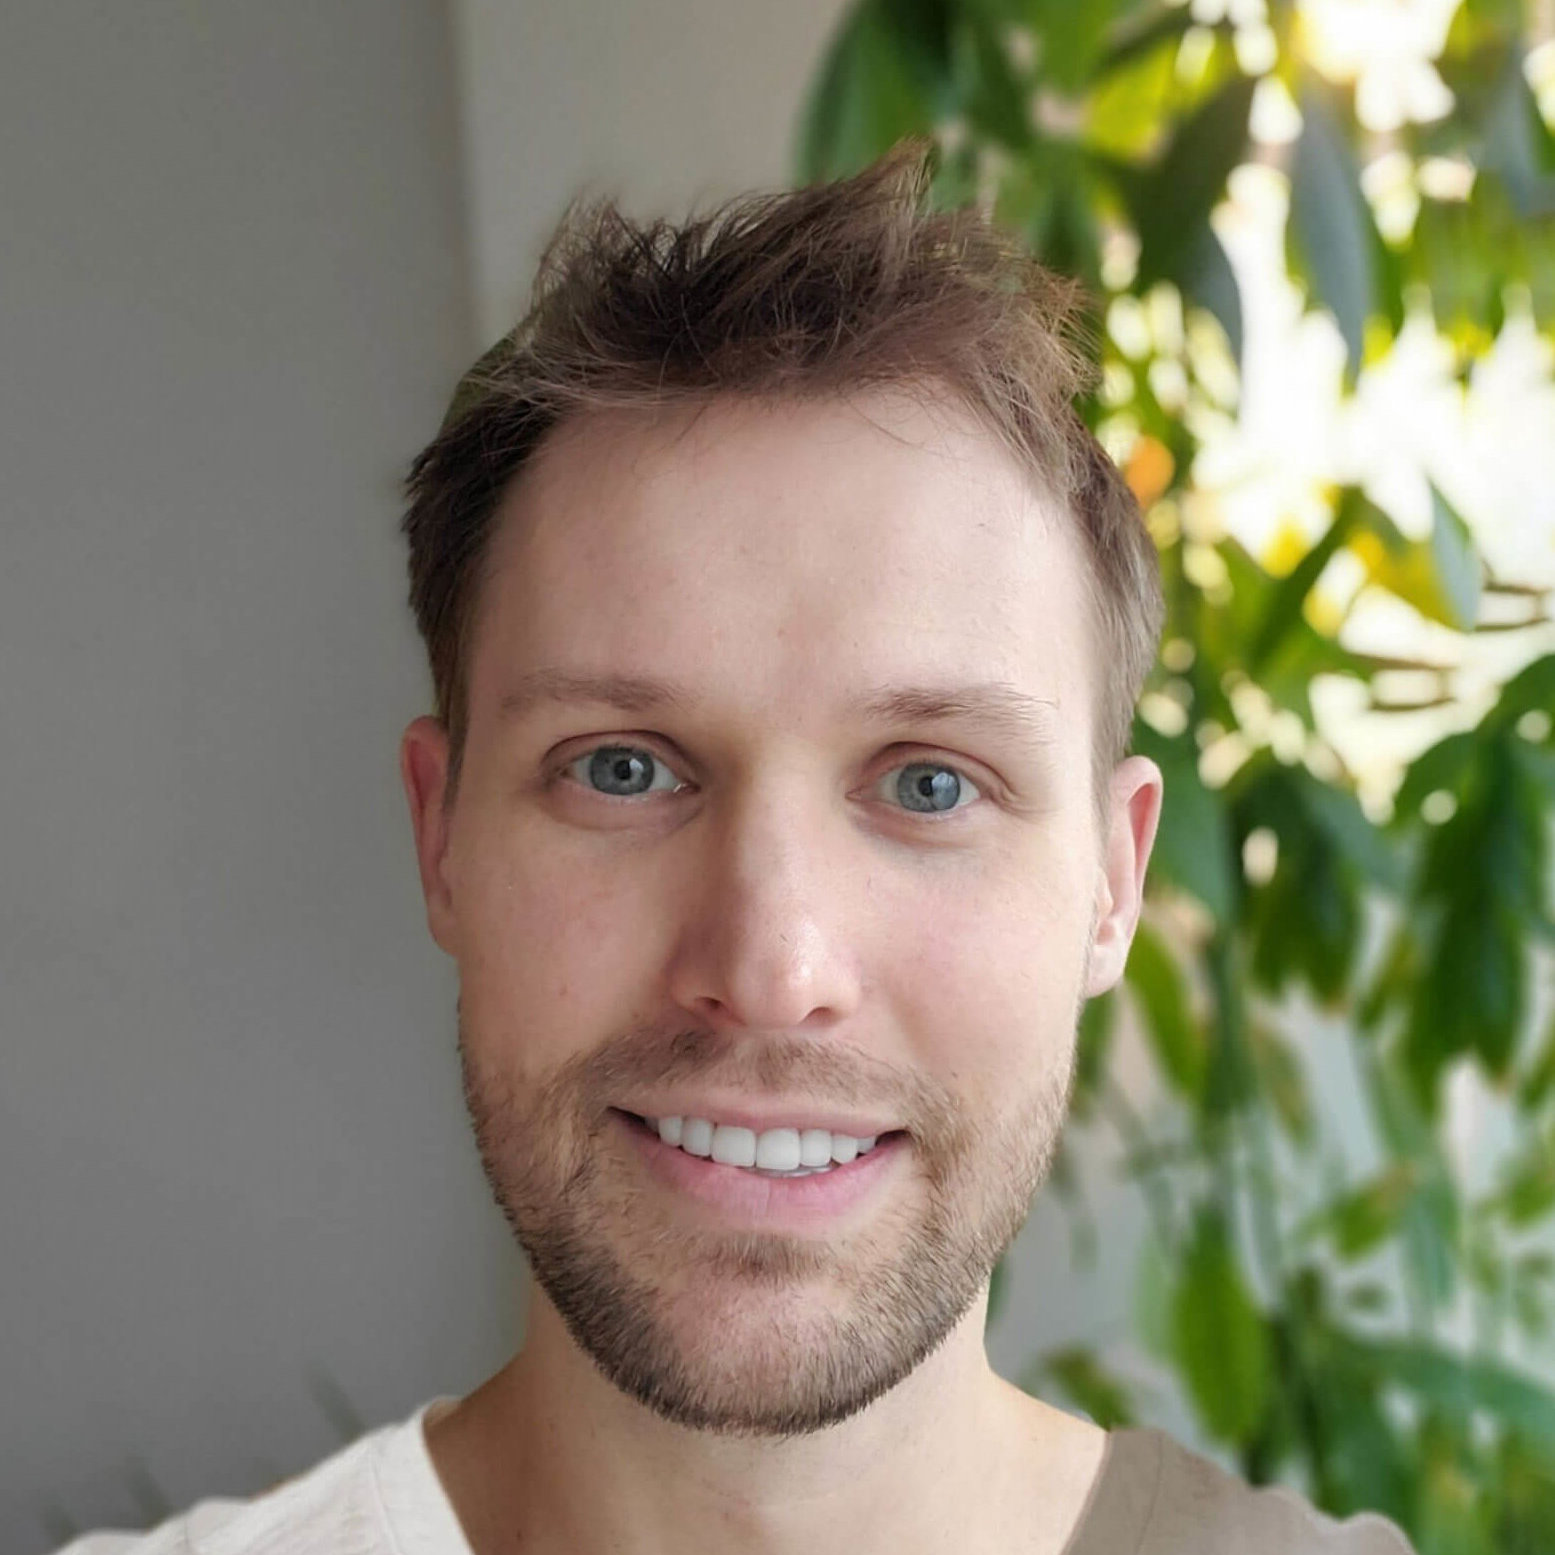 A photo of Scott Splunchic, who has short, dark blonde hair, short facial hair, and blue eyes. He is wearing a white shirt and is smiling pleasantly in a room with lush greenery behind him.